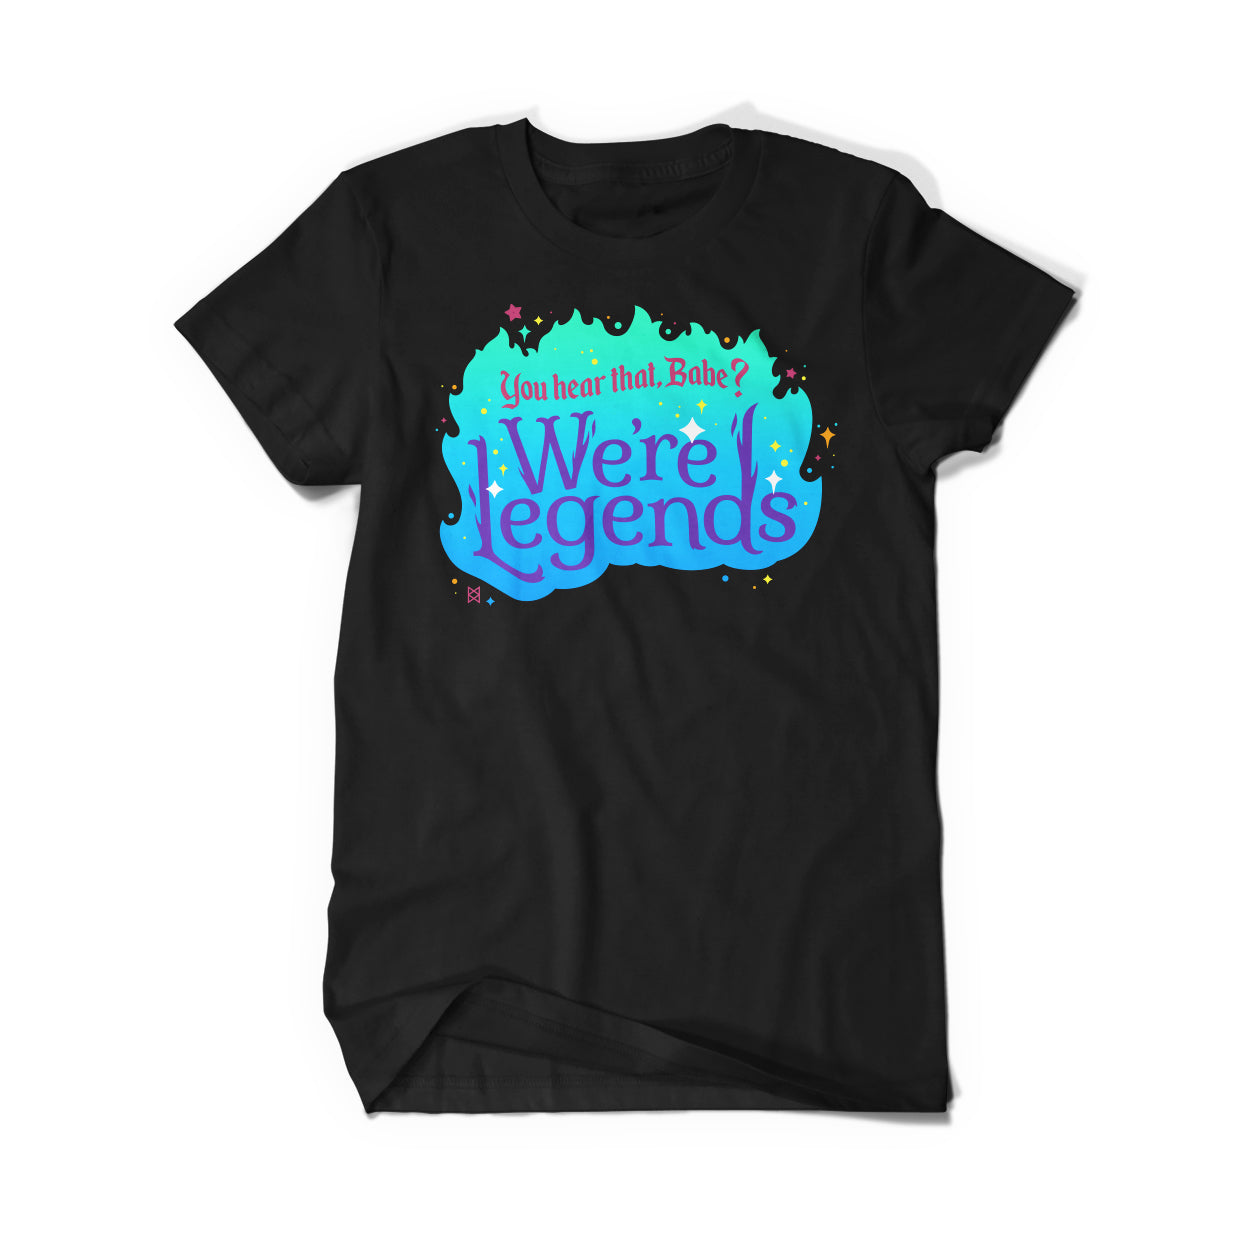 A black shirt. In red, it says, “You hear that, Babe?” Below that, in larger purple letters it says, “We’re Legends”. The words are inside a large teal to blue ombre flame. Around the outside are red, yellow, and green stars and sparkles.